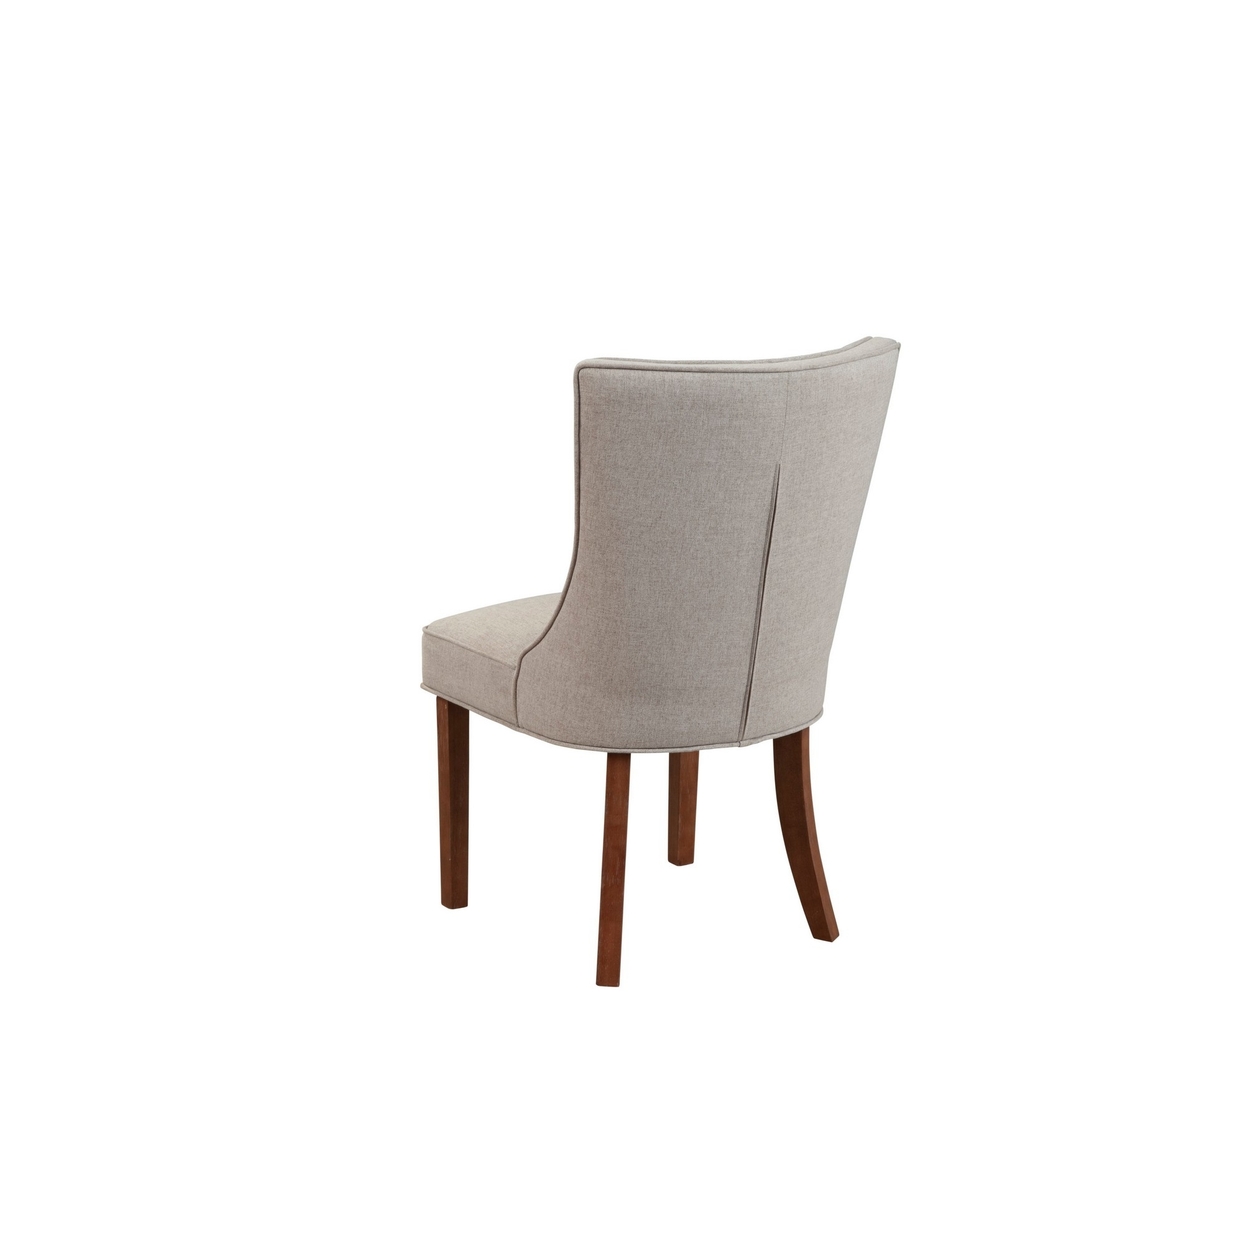 Paige 25 Inch Dining Side Chair, Fabric Upholstery, Set Of 2, Beige, Brown- Saltoro Sherpi